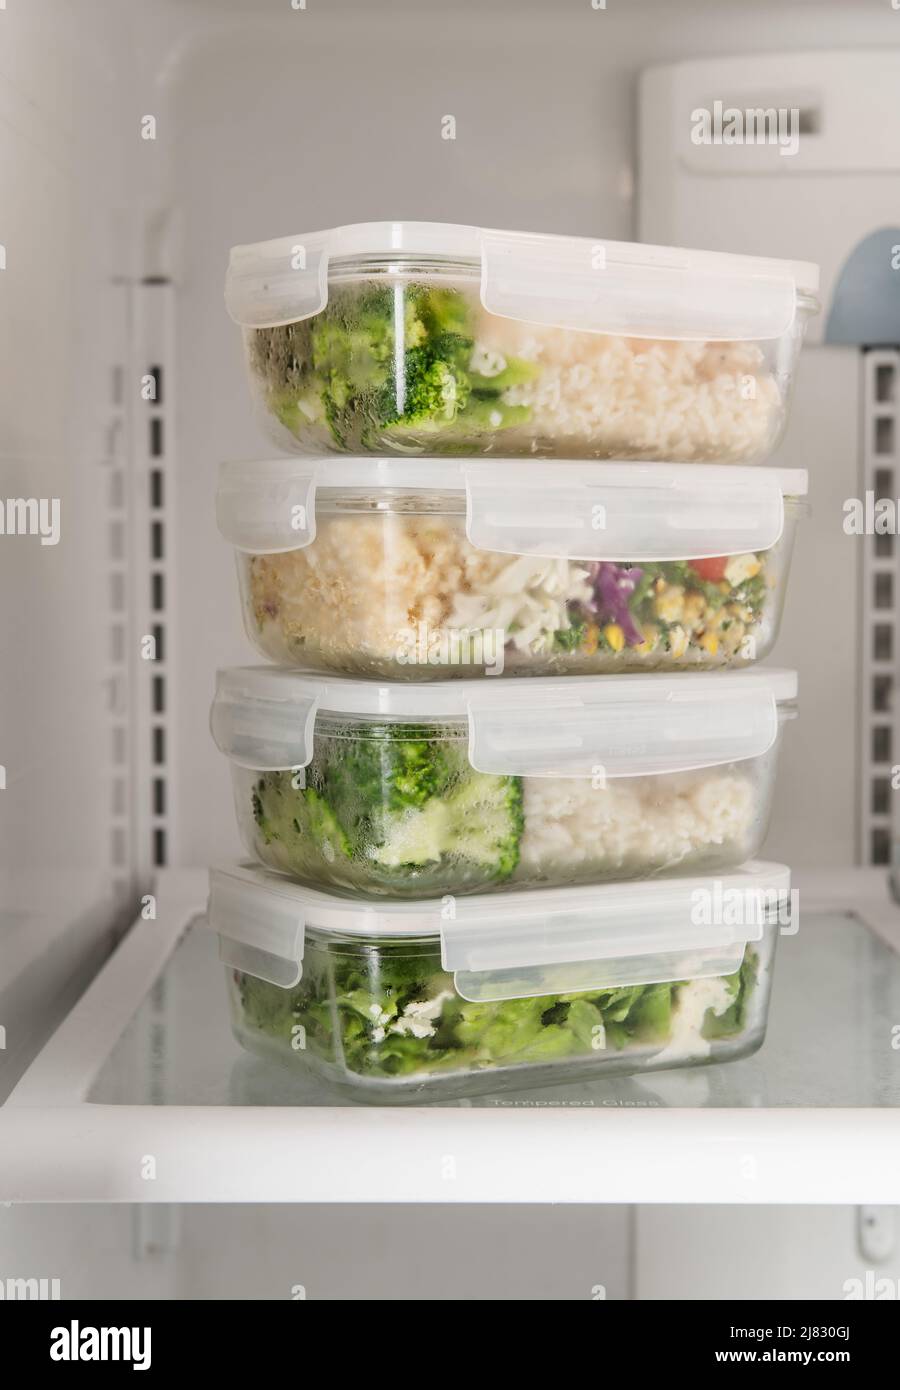 Meals/food prep containers sitting in the fridge Stock Photo